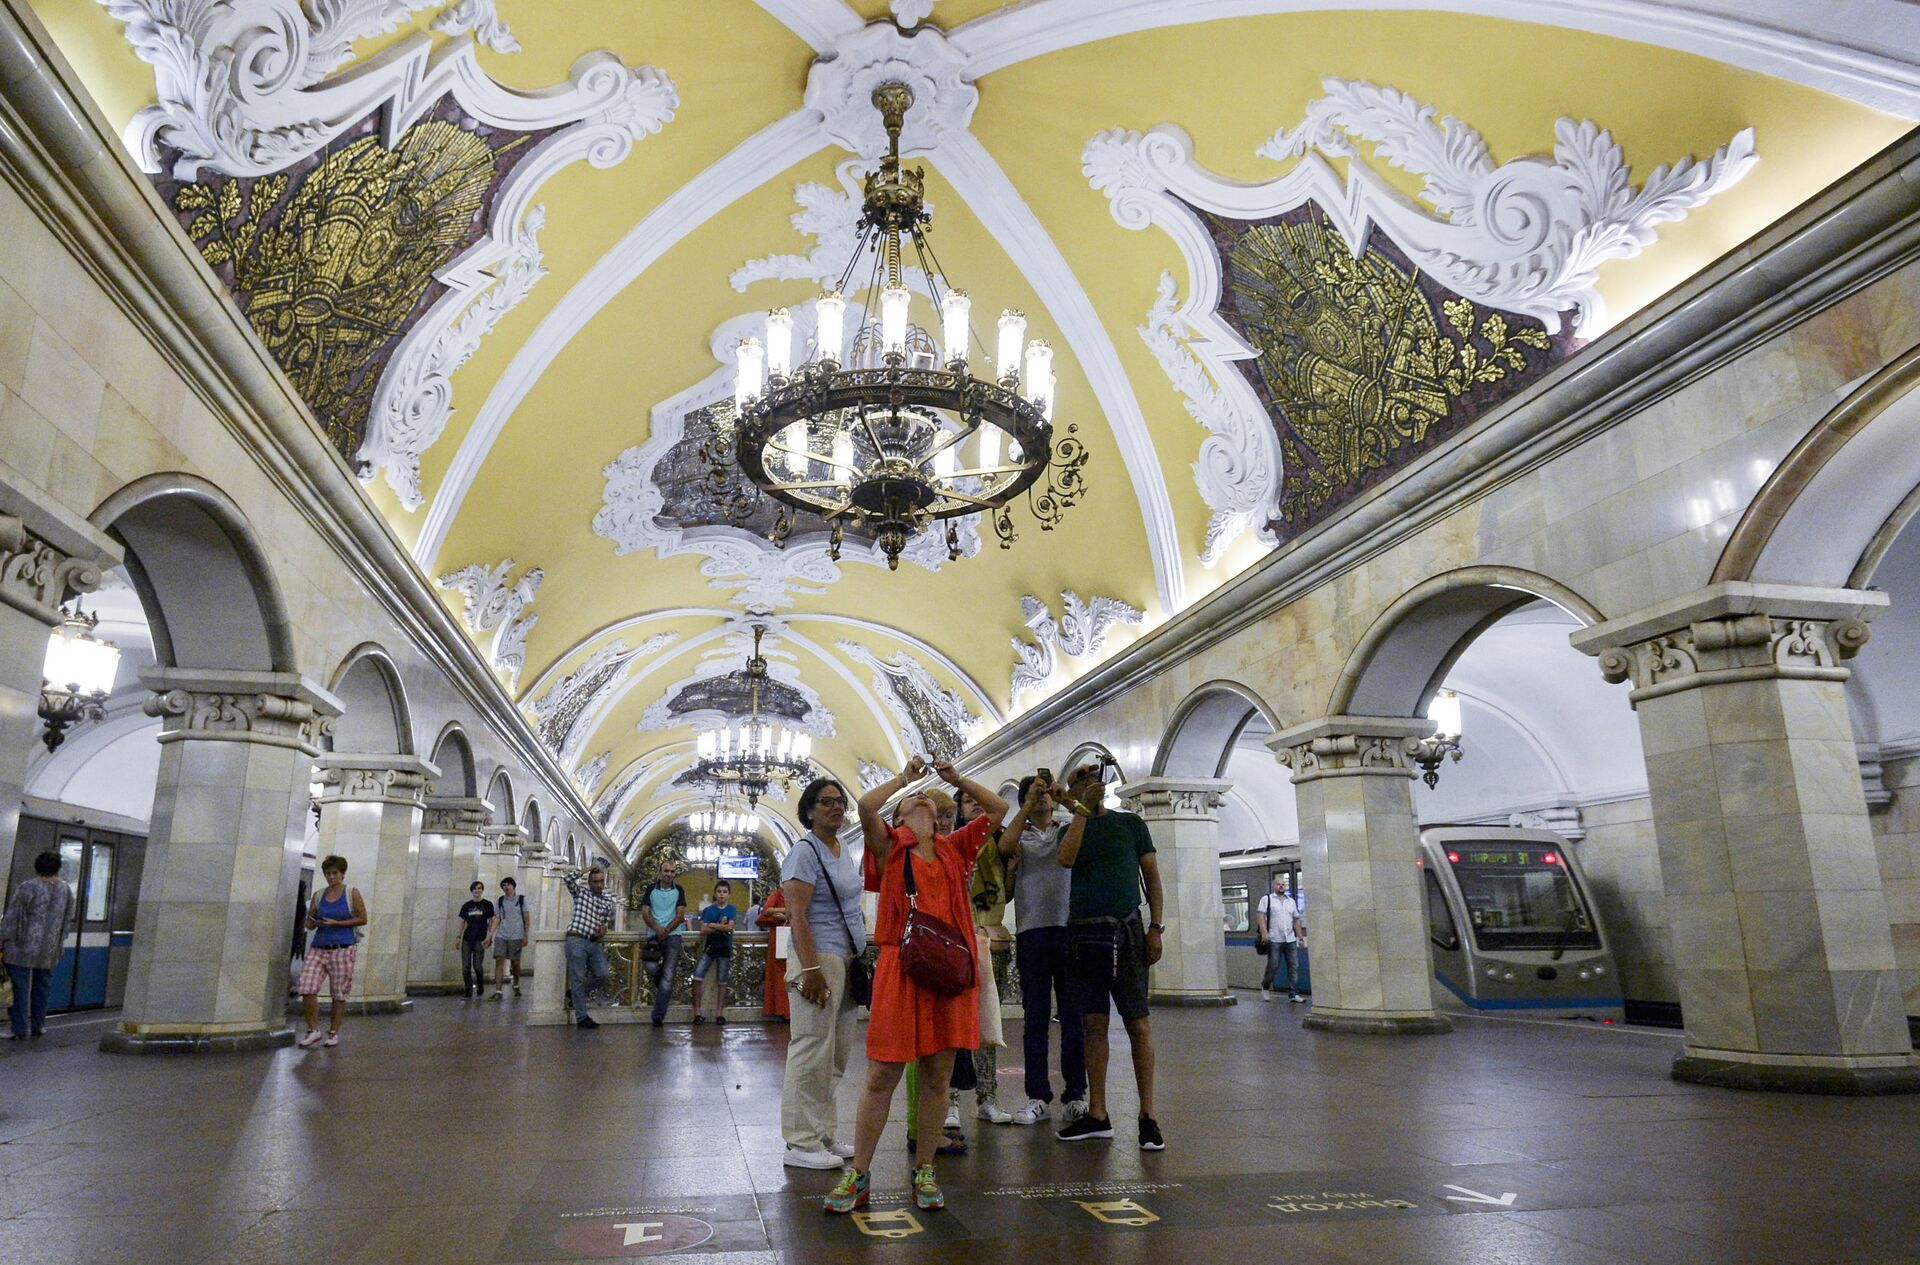 Experts predict influx of foreign tourists to Russia - Sputnik International, 1920, 26.12.2022